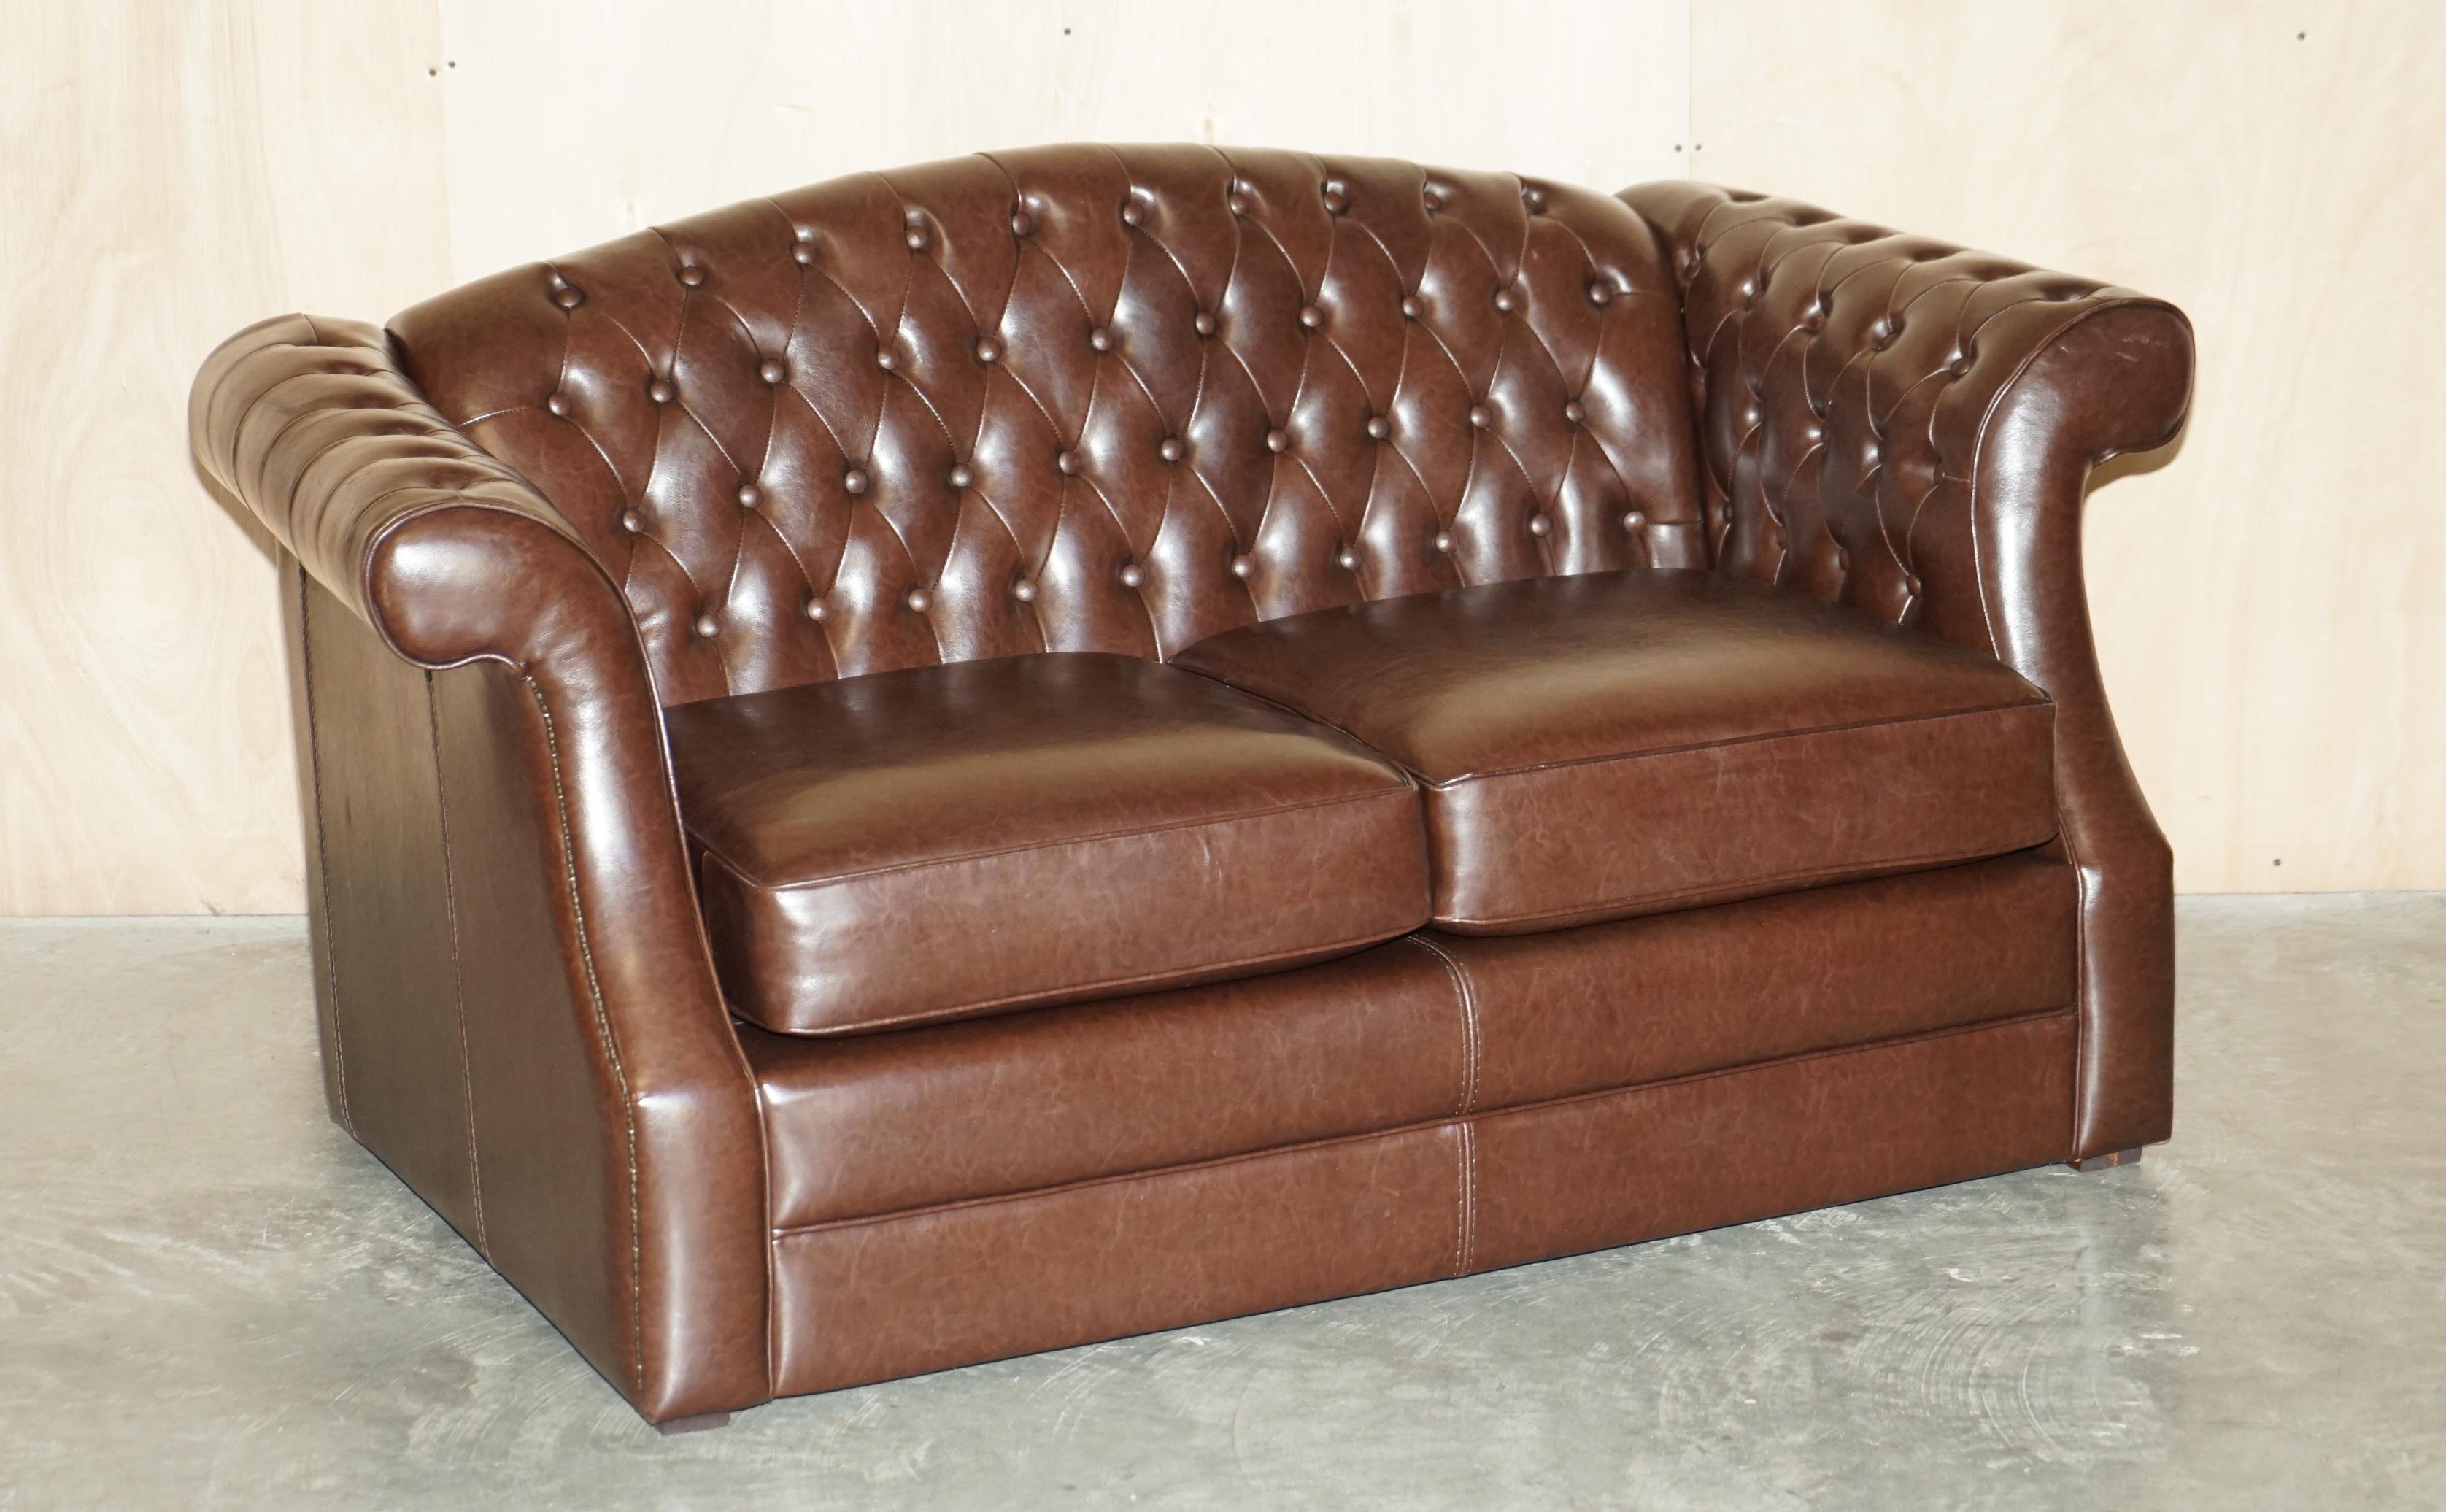 We are delighted to offer for sale this lovely vintage lightly restored Chesterfield deep brown leather sofa and armchair suite

A good looking and well made suite, based on the Georgian hump back sofas dating to circa 1750, this is a contemporary